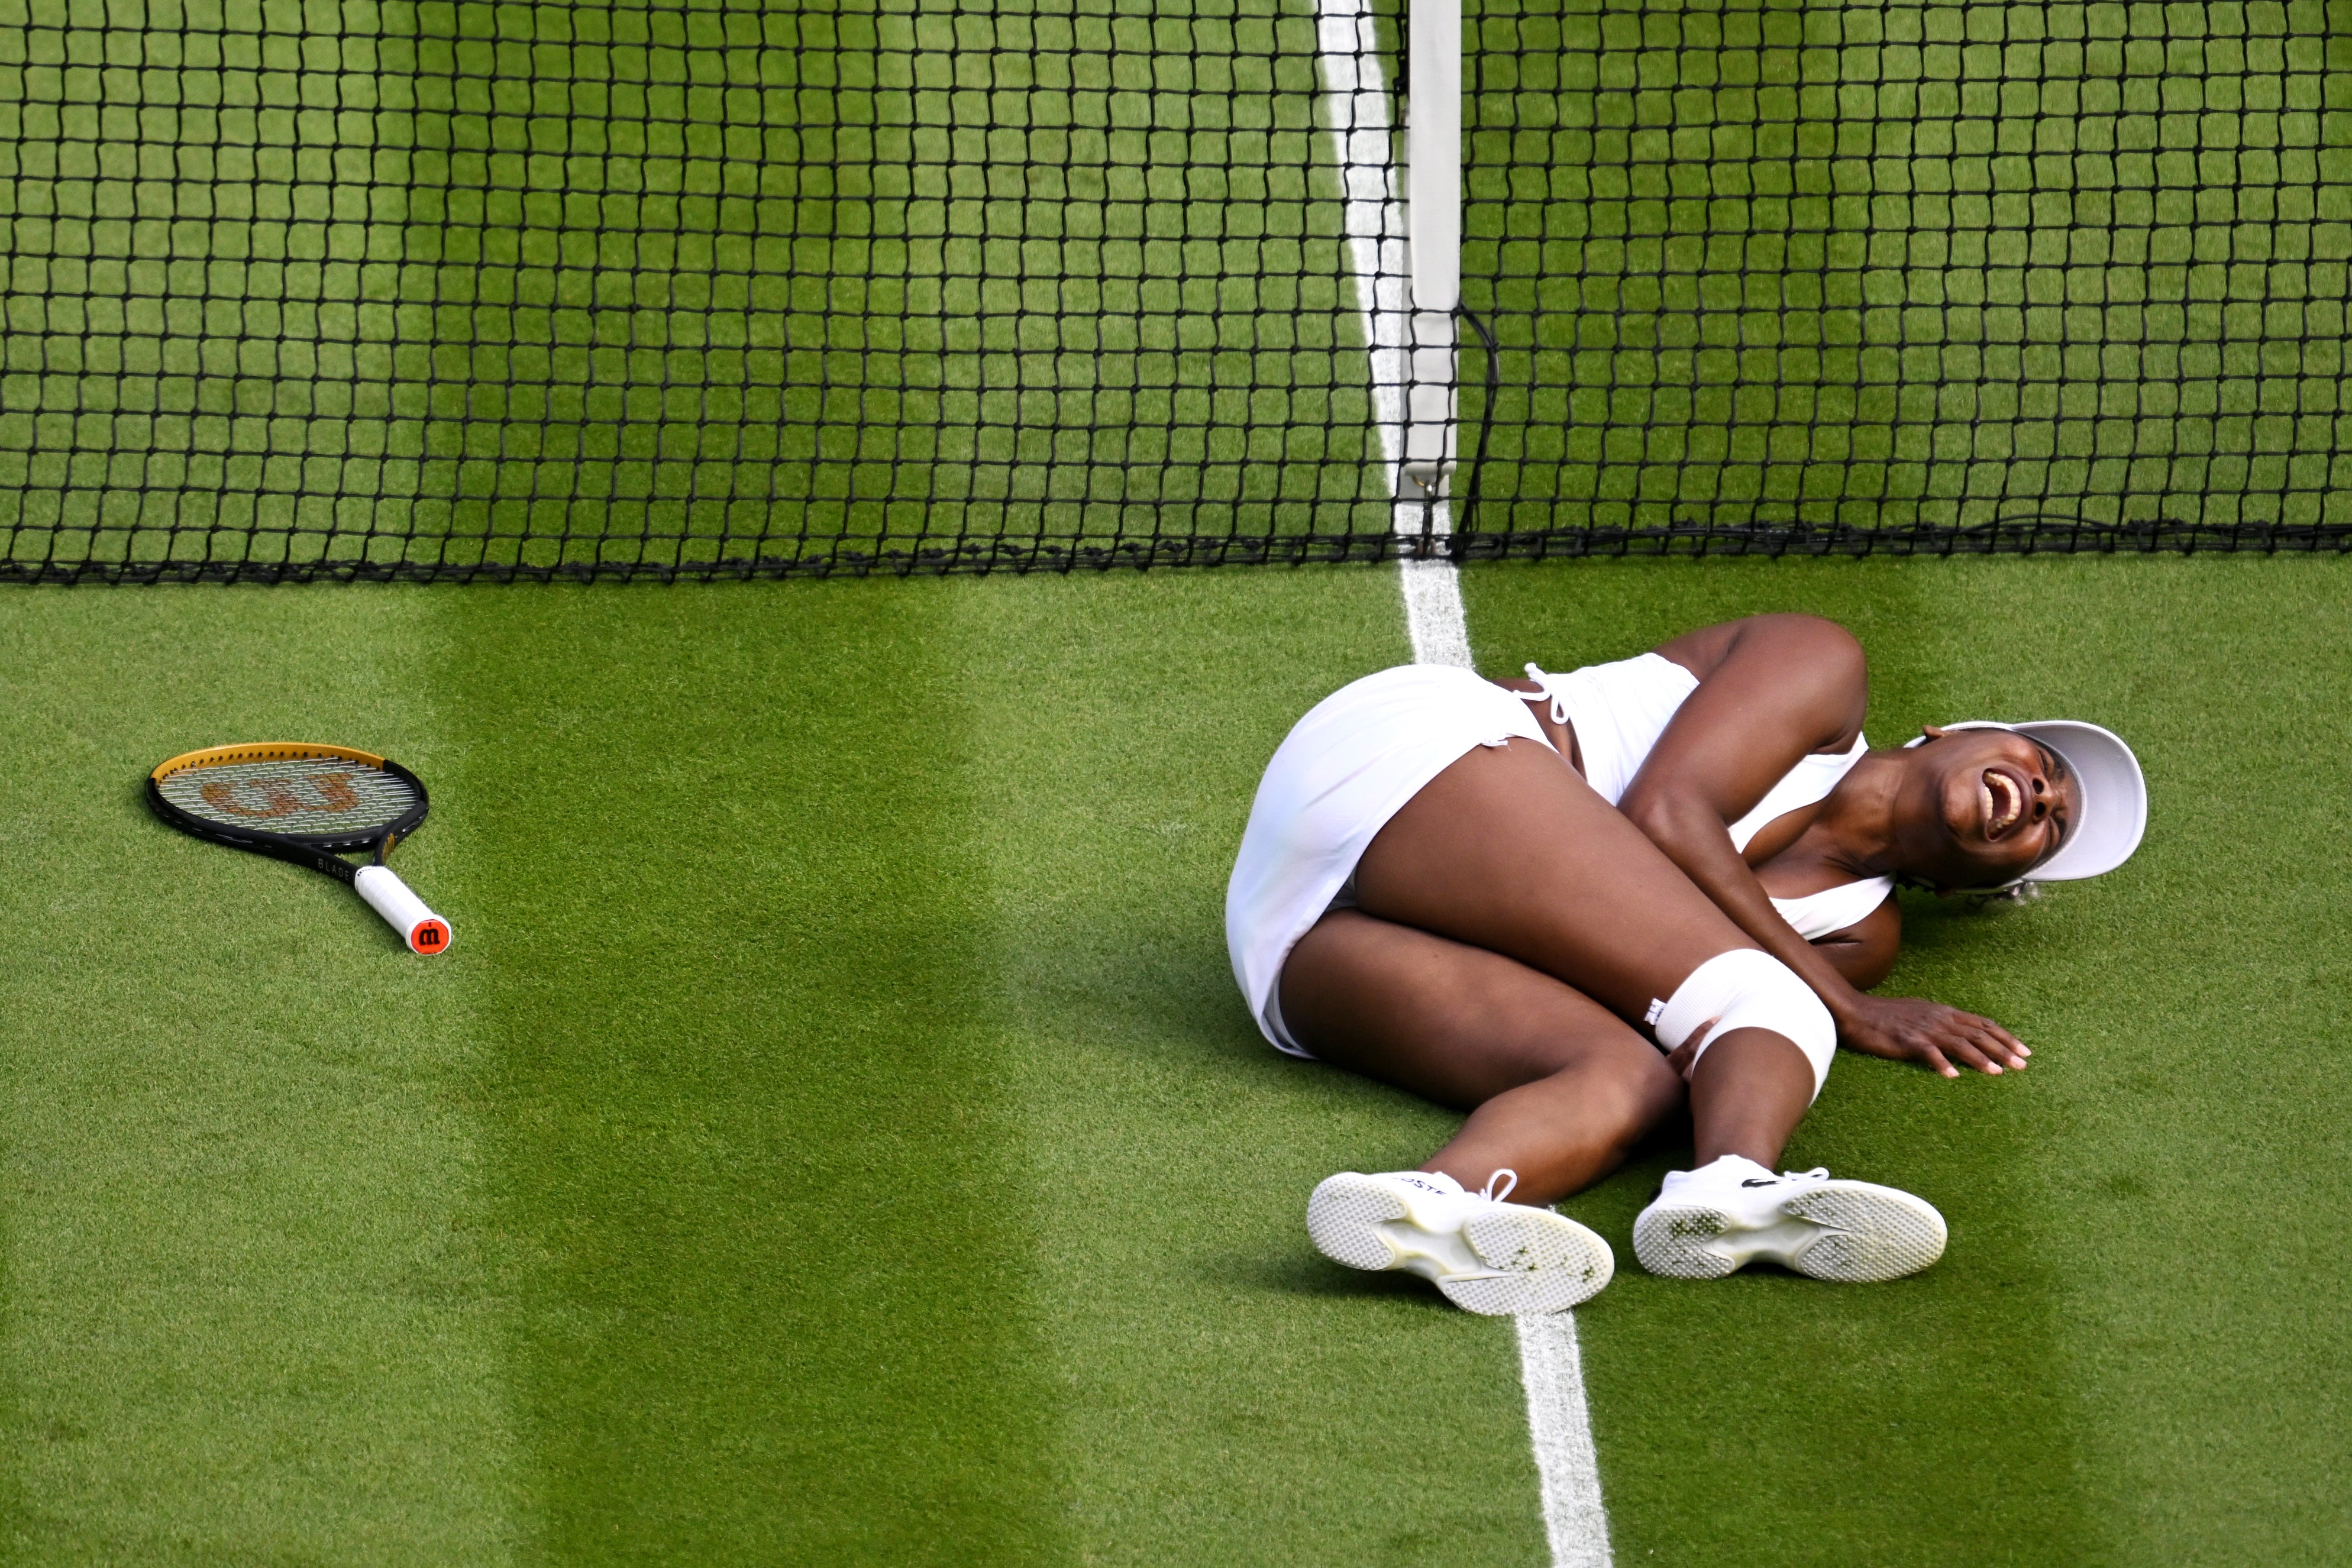 Wimbledon: Venus Williams screams in agony as she injures knee early in first round match against Elina Svitolina | The Independent